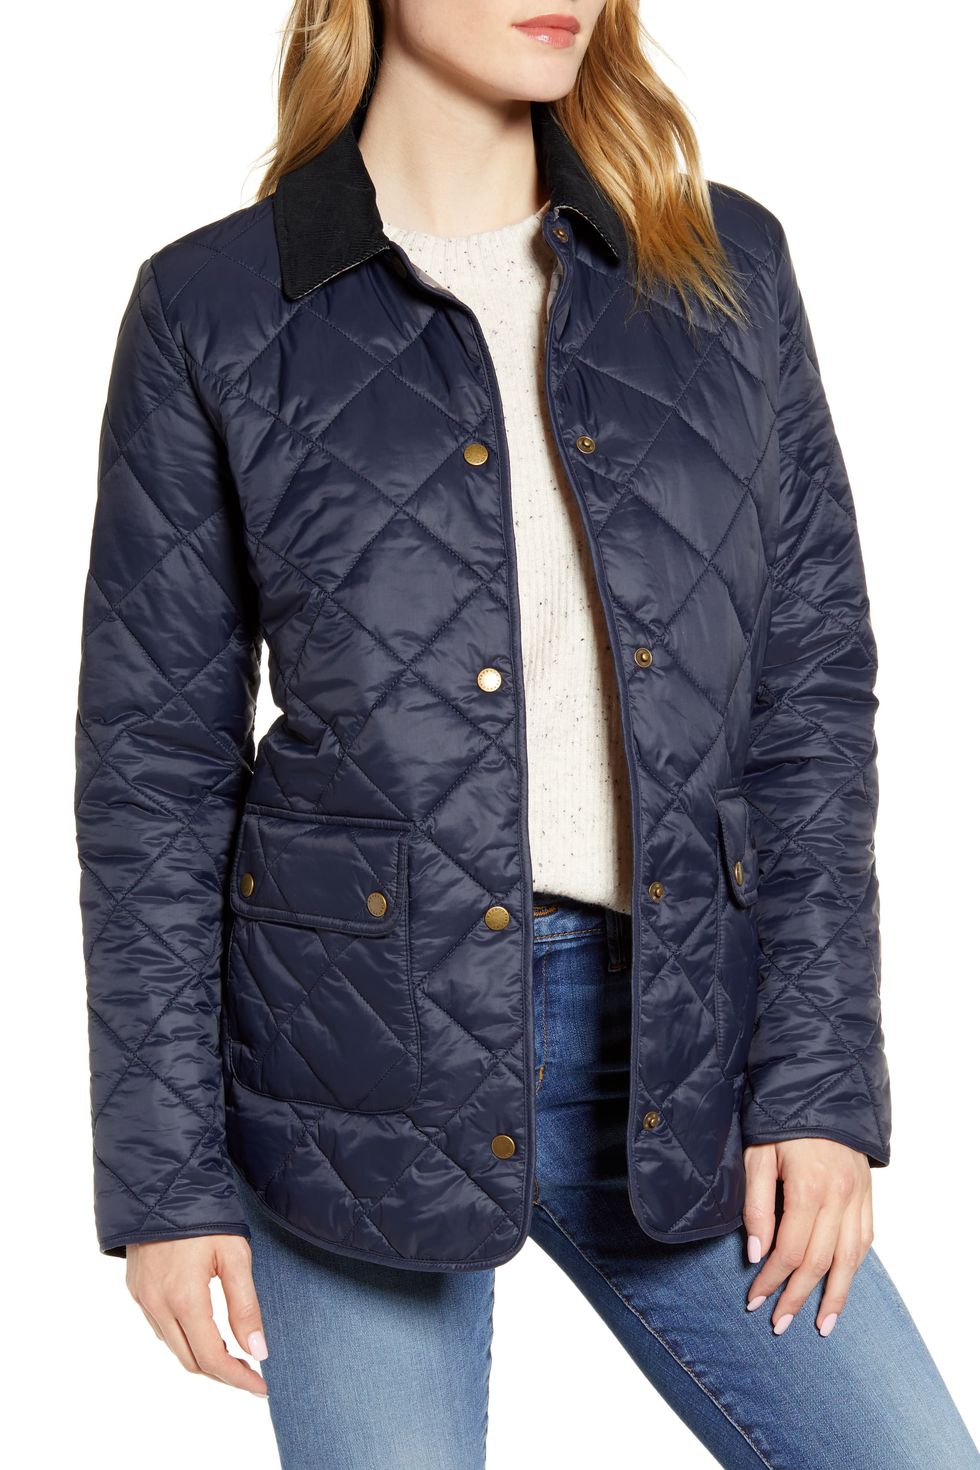 Oakland Diamond Quilted Jacket in Navy